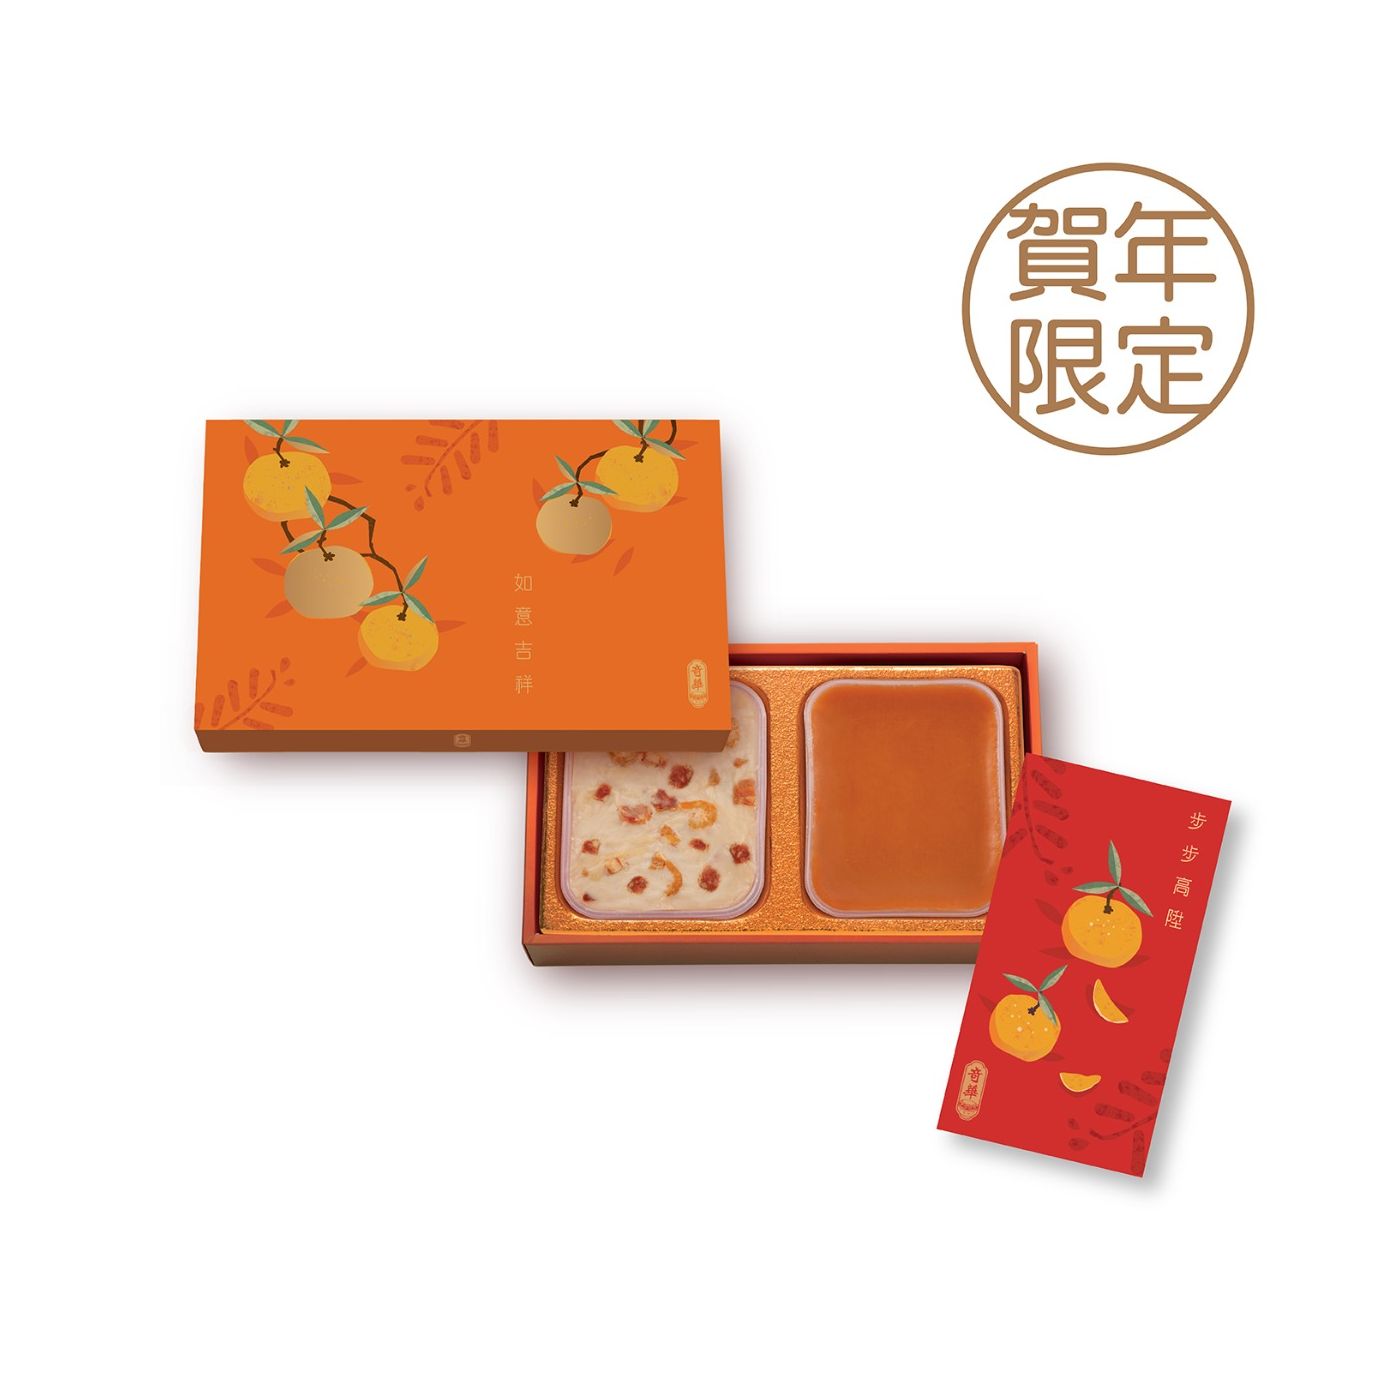 [JLL Offer] Kee Wah | Chinese New Year Pudding (Physical Coupon)